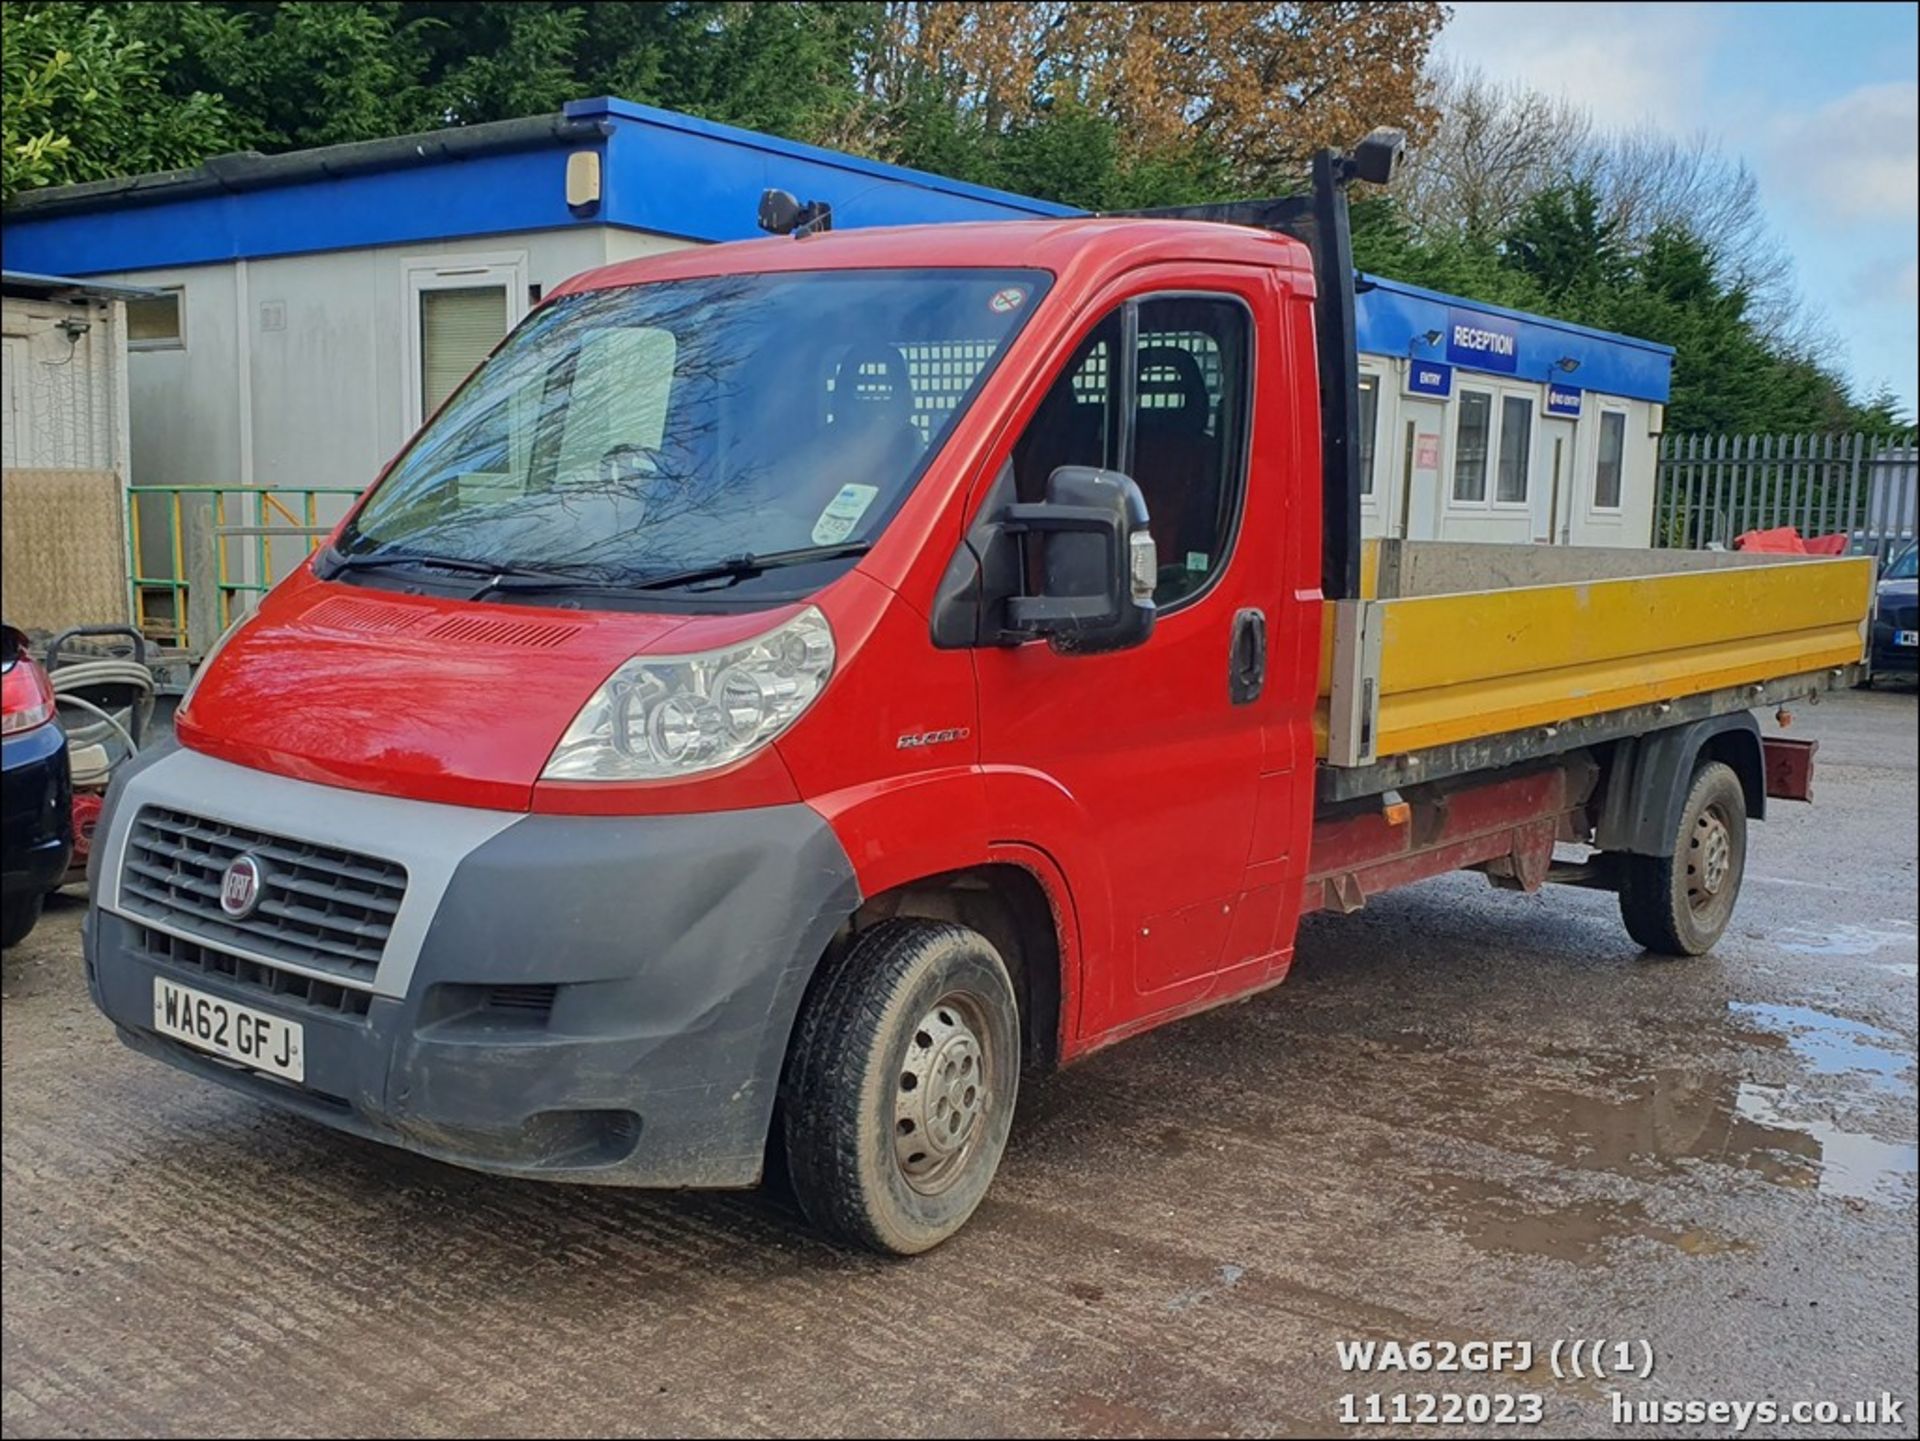 12/62 FIAT DUCATO 35 MULTIJET - 2287cc 2.dr Flat Bed (Red)